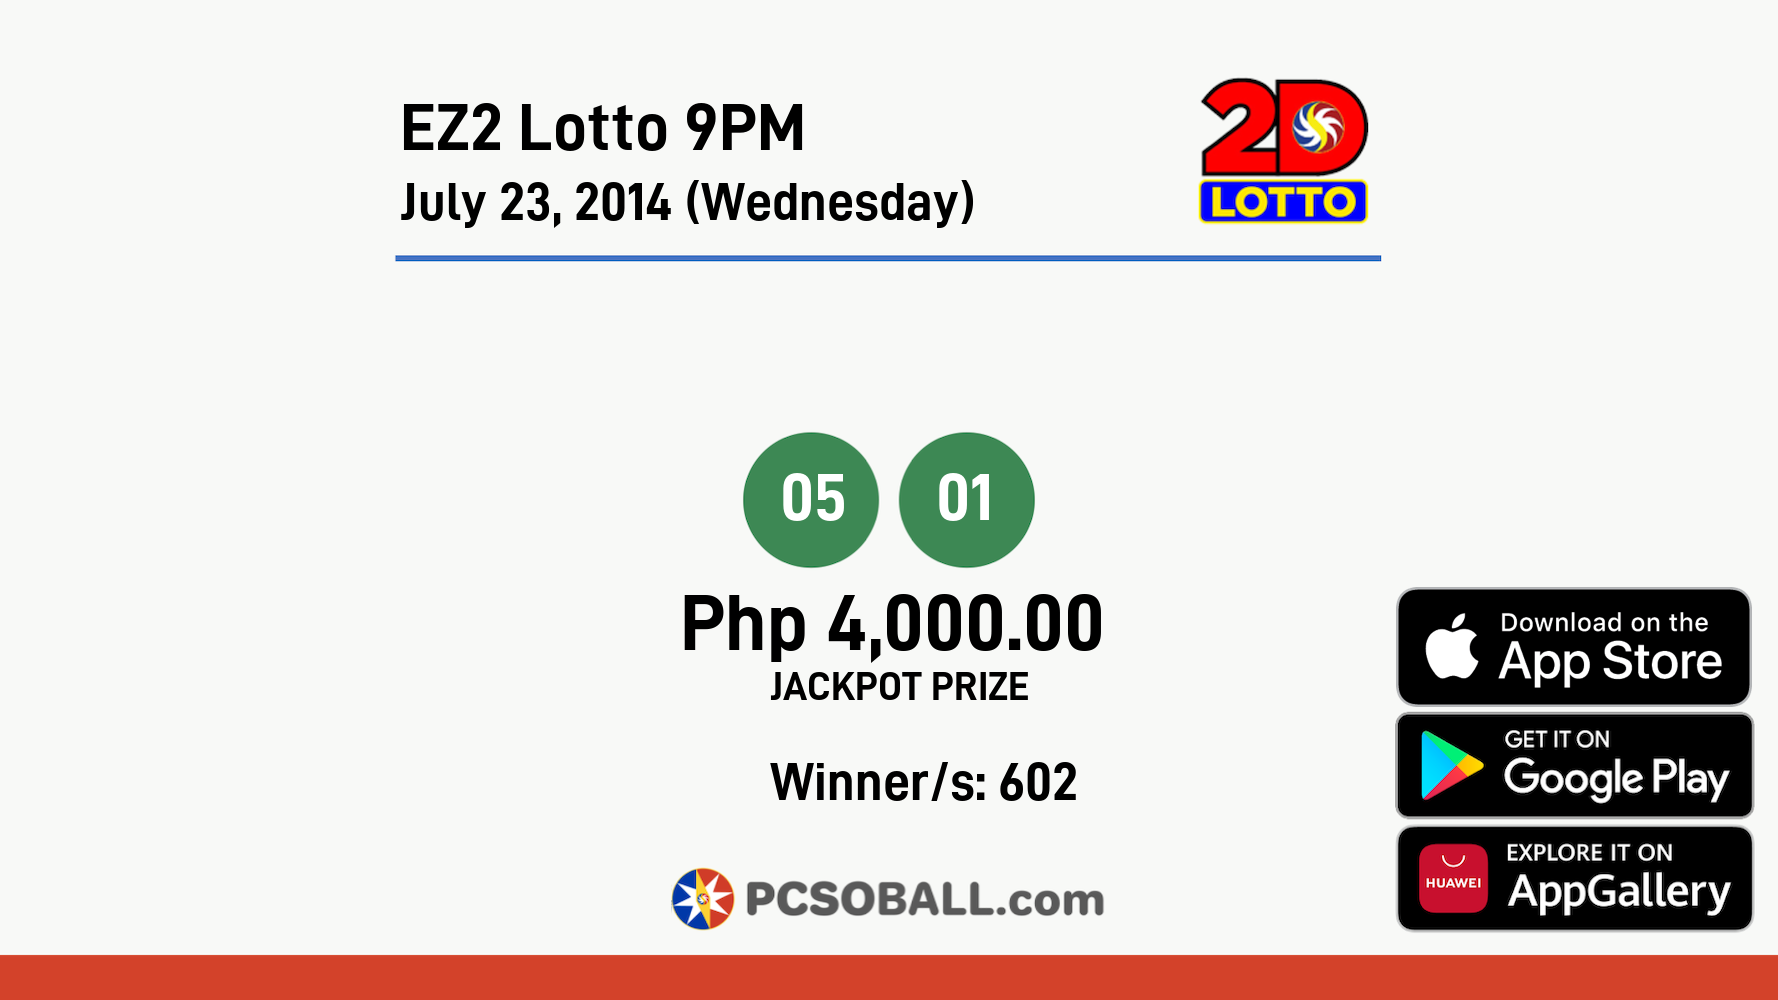 EZ2 Lotto 9PM July 23, 2014 (Wednesday) Result